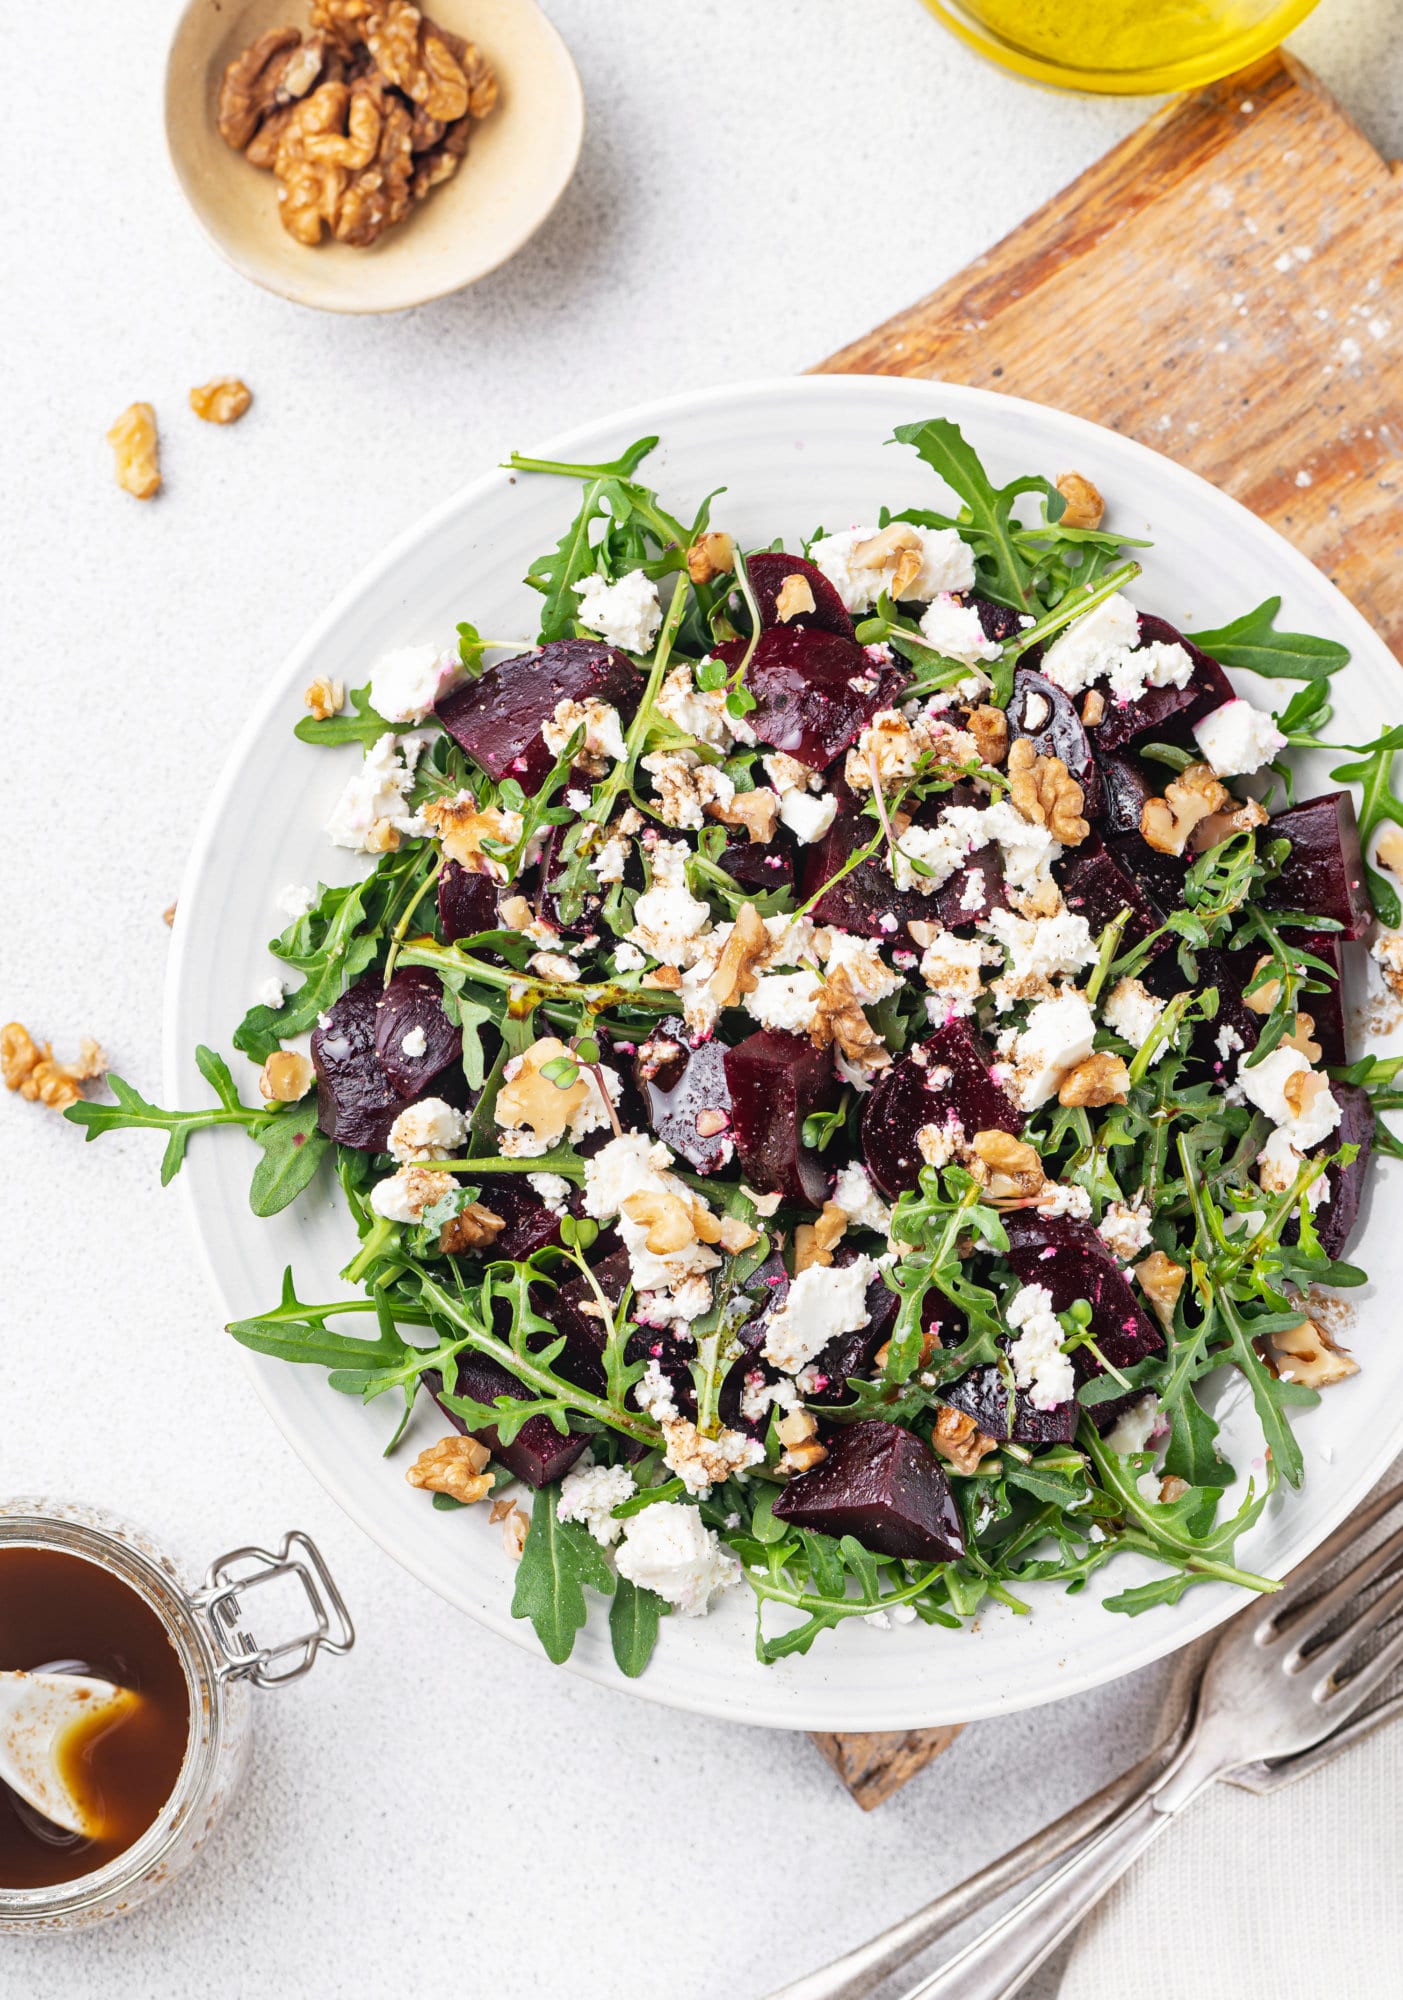 beet-salad-on-a-white-plate-and-wooden-board-with-cheese-and-arugula-with-forks-and-walnuts